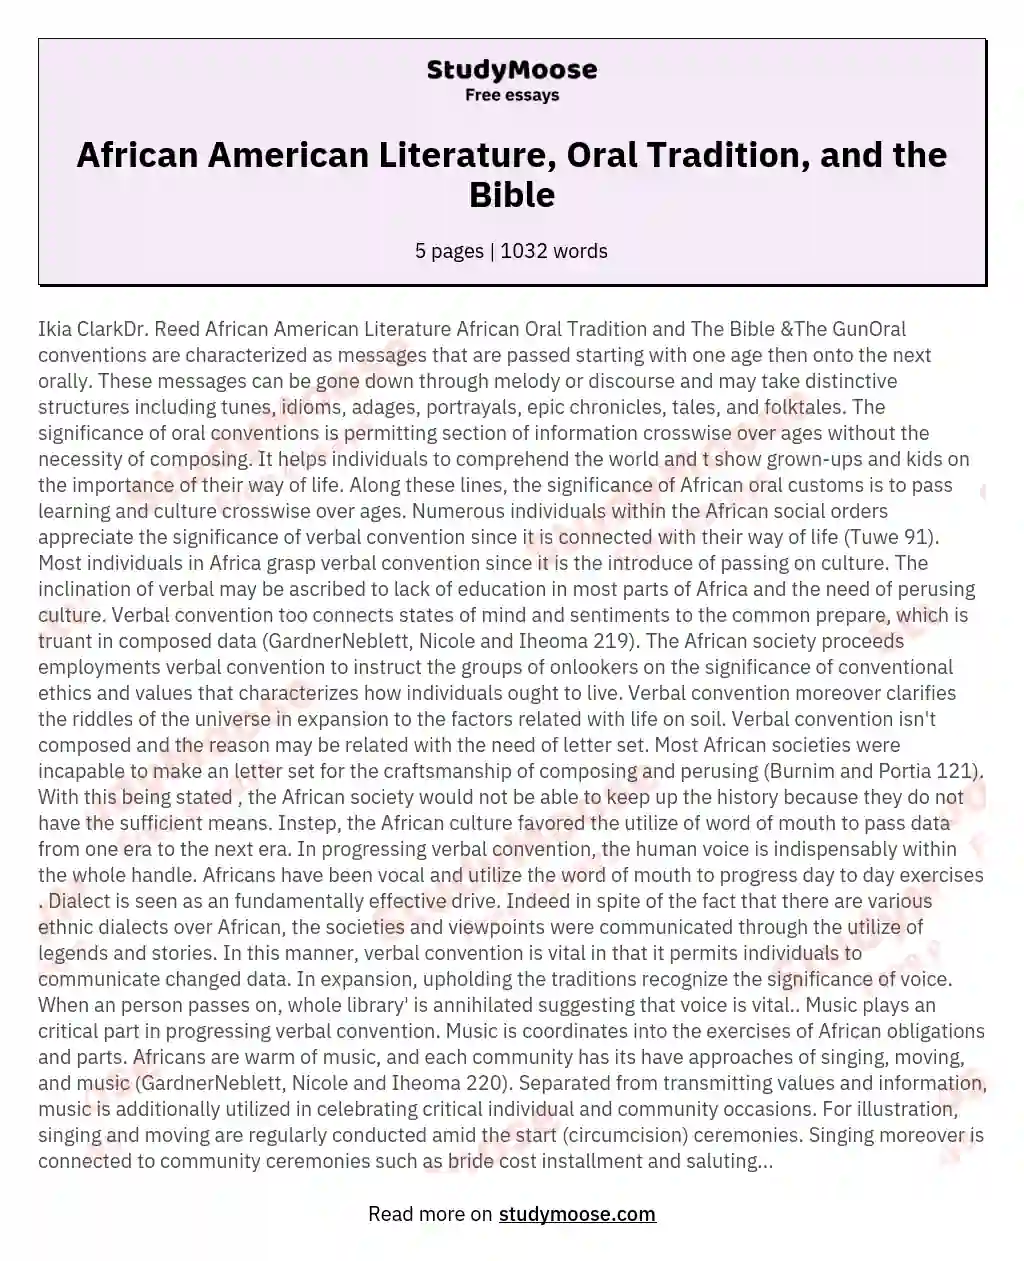 African American Literature, Oral Tradition, and the Bible